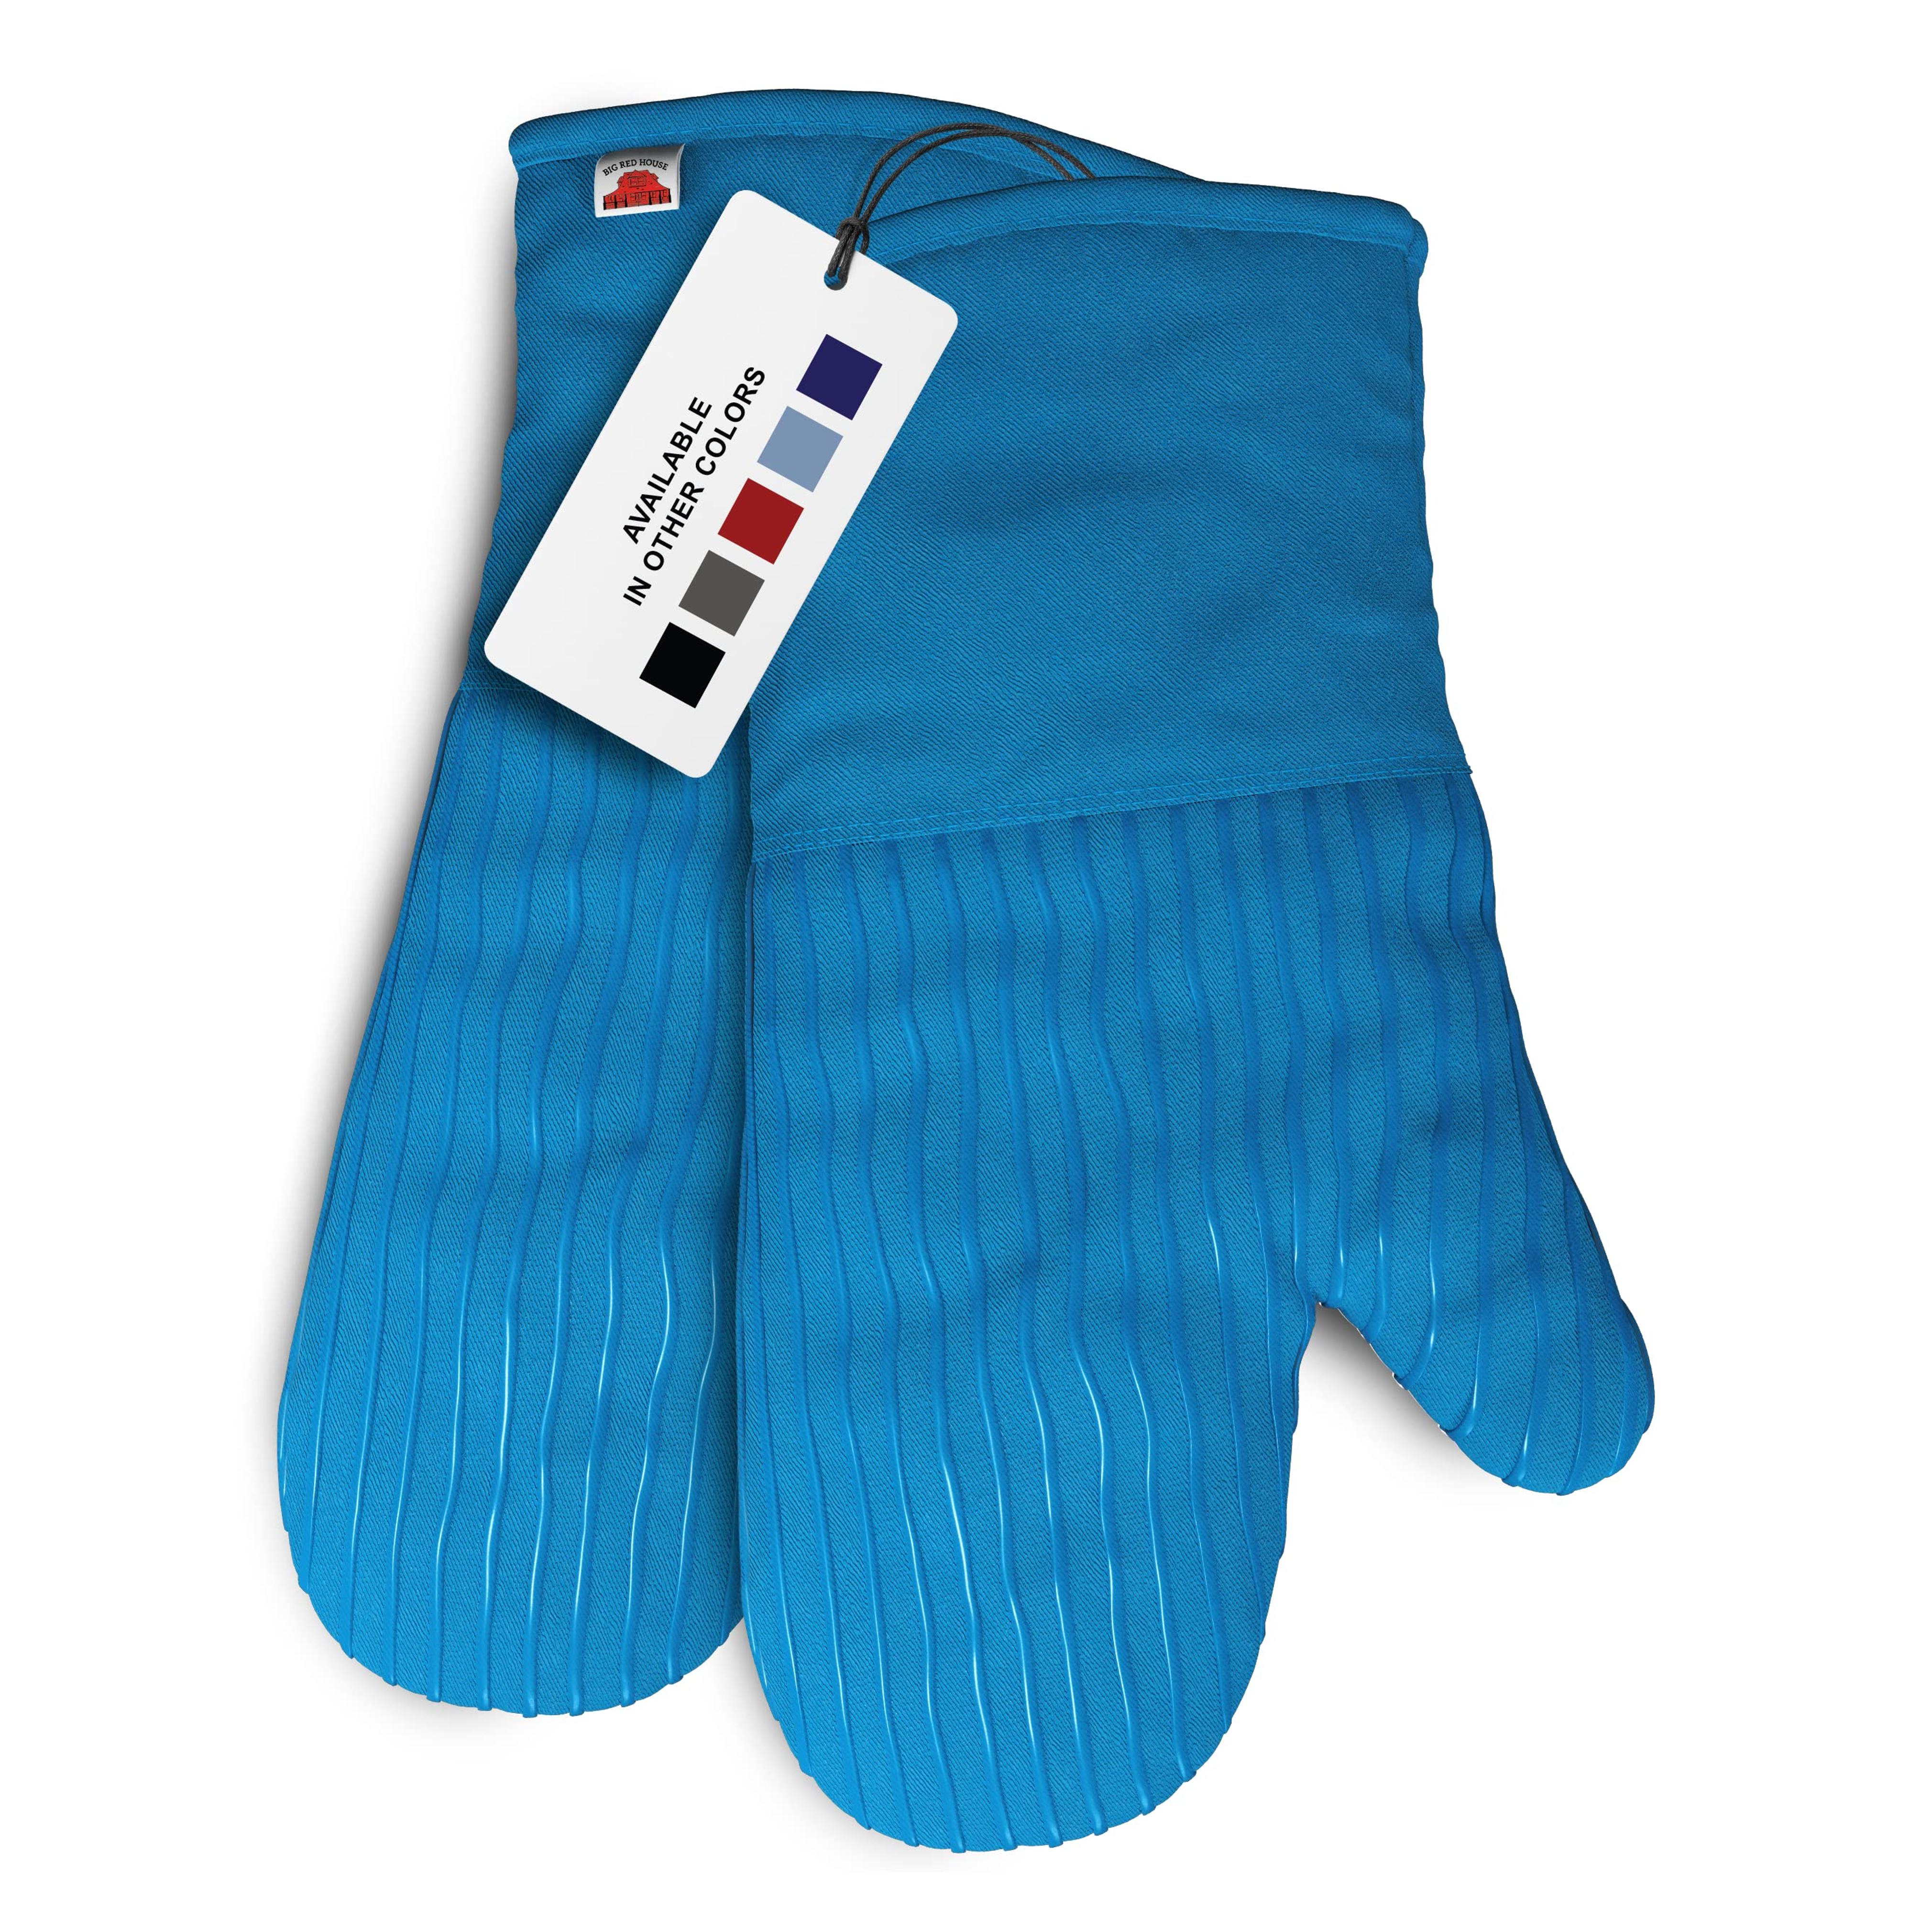 Big Red House Mini Oven Mitts, Made with Recycled Cotton Infill, 480 F Heat Resistant, 1 Pair Turquoise